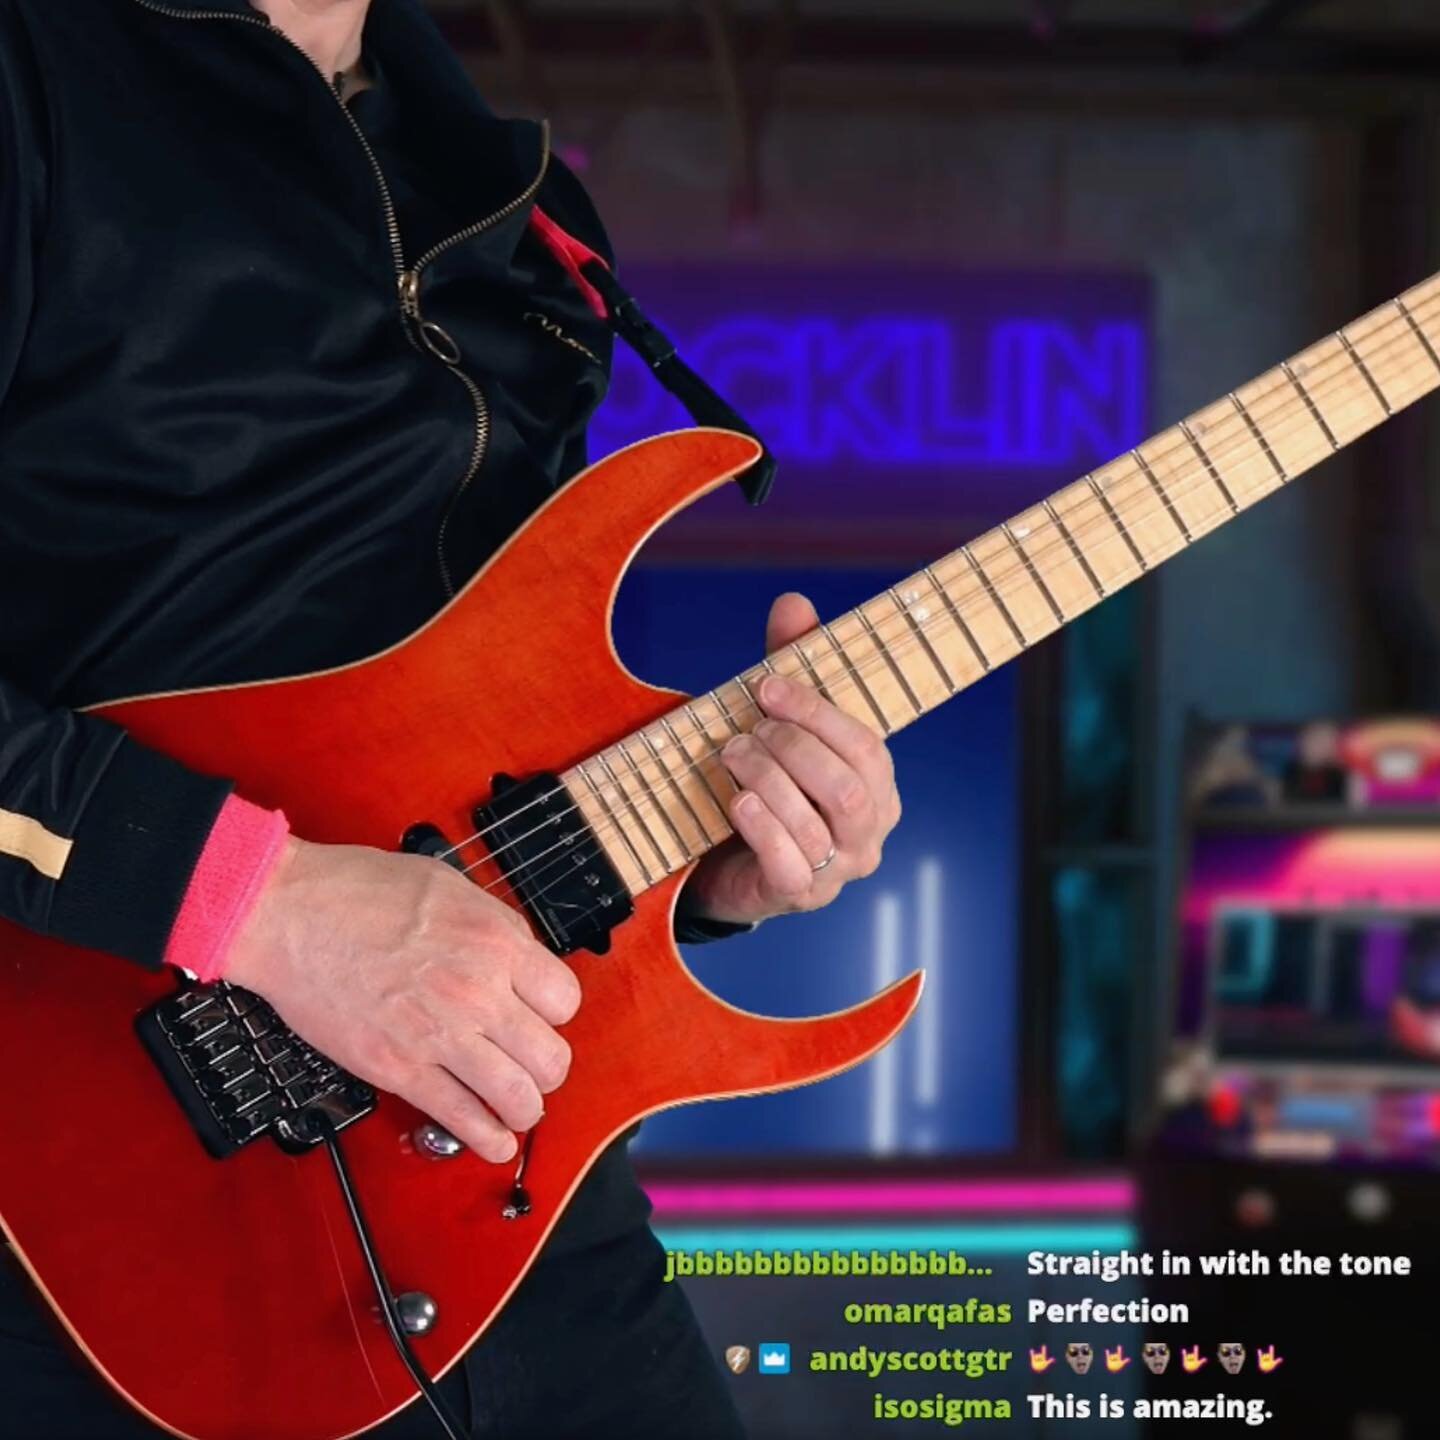 NovaNine was just featured on Shred Club! Watch @mcrocklin shred over a scaled back version of an as-yet unreleased NovaNine track! Starts at about 40:45 &mdash; check it out! https://www.twitch.tv/videos/1138142731 #synthwave #retrowave #guitarinstr